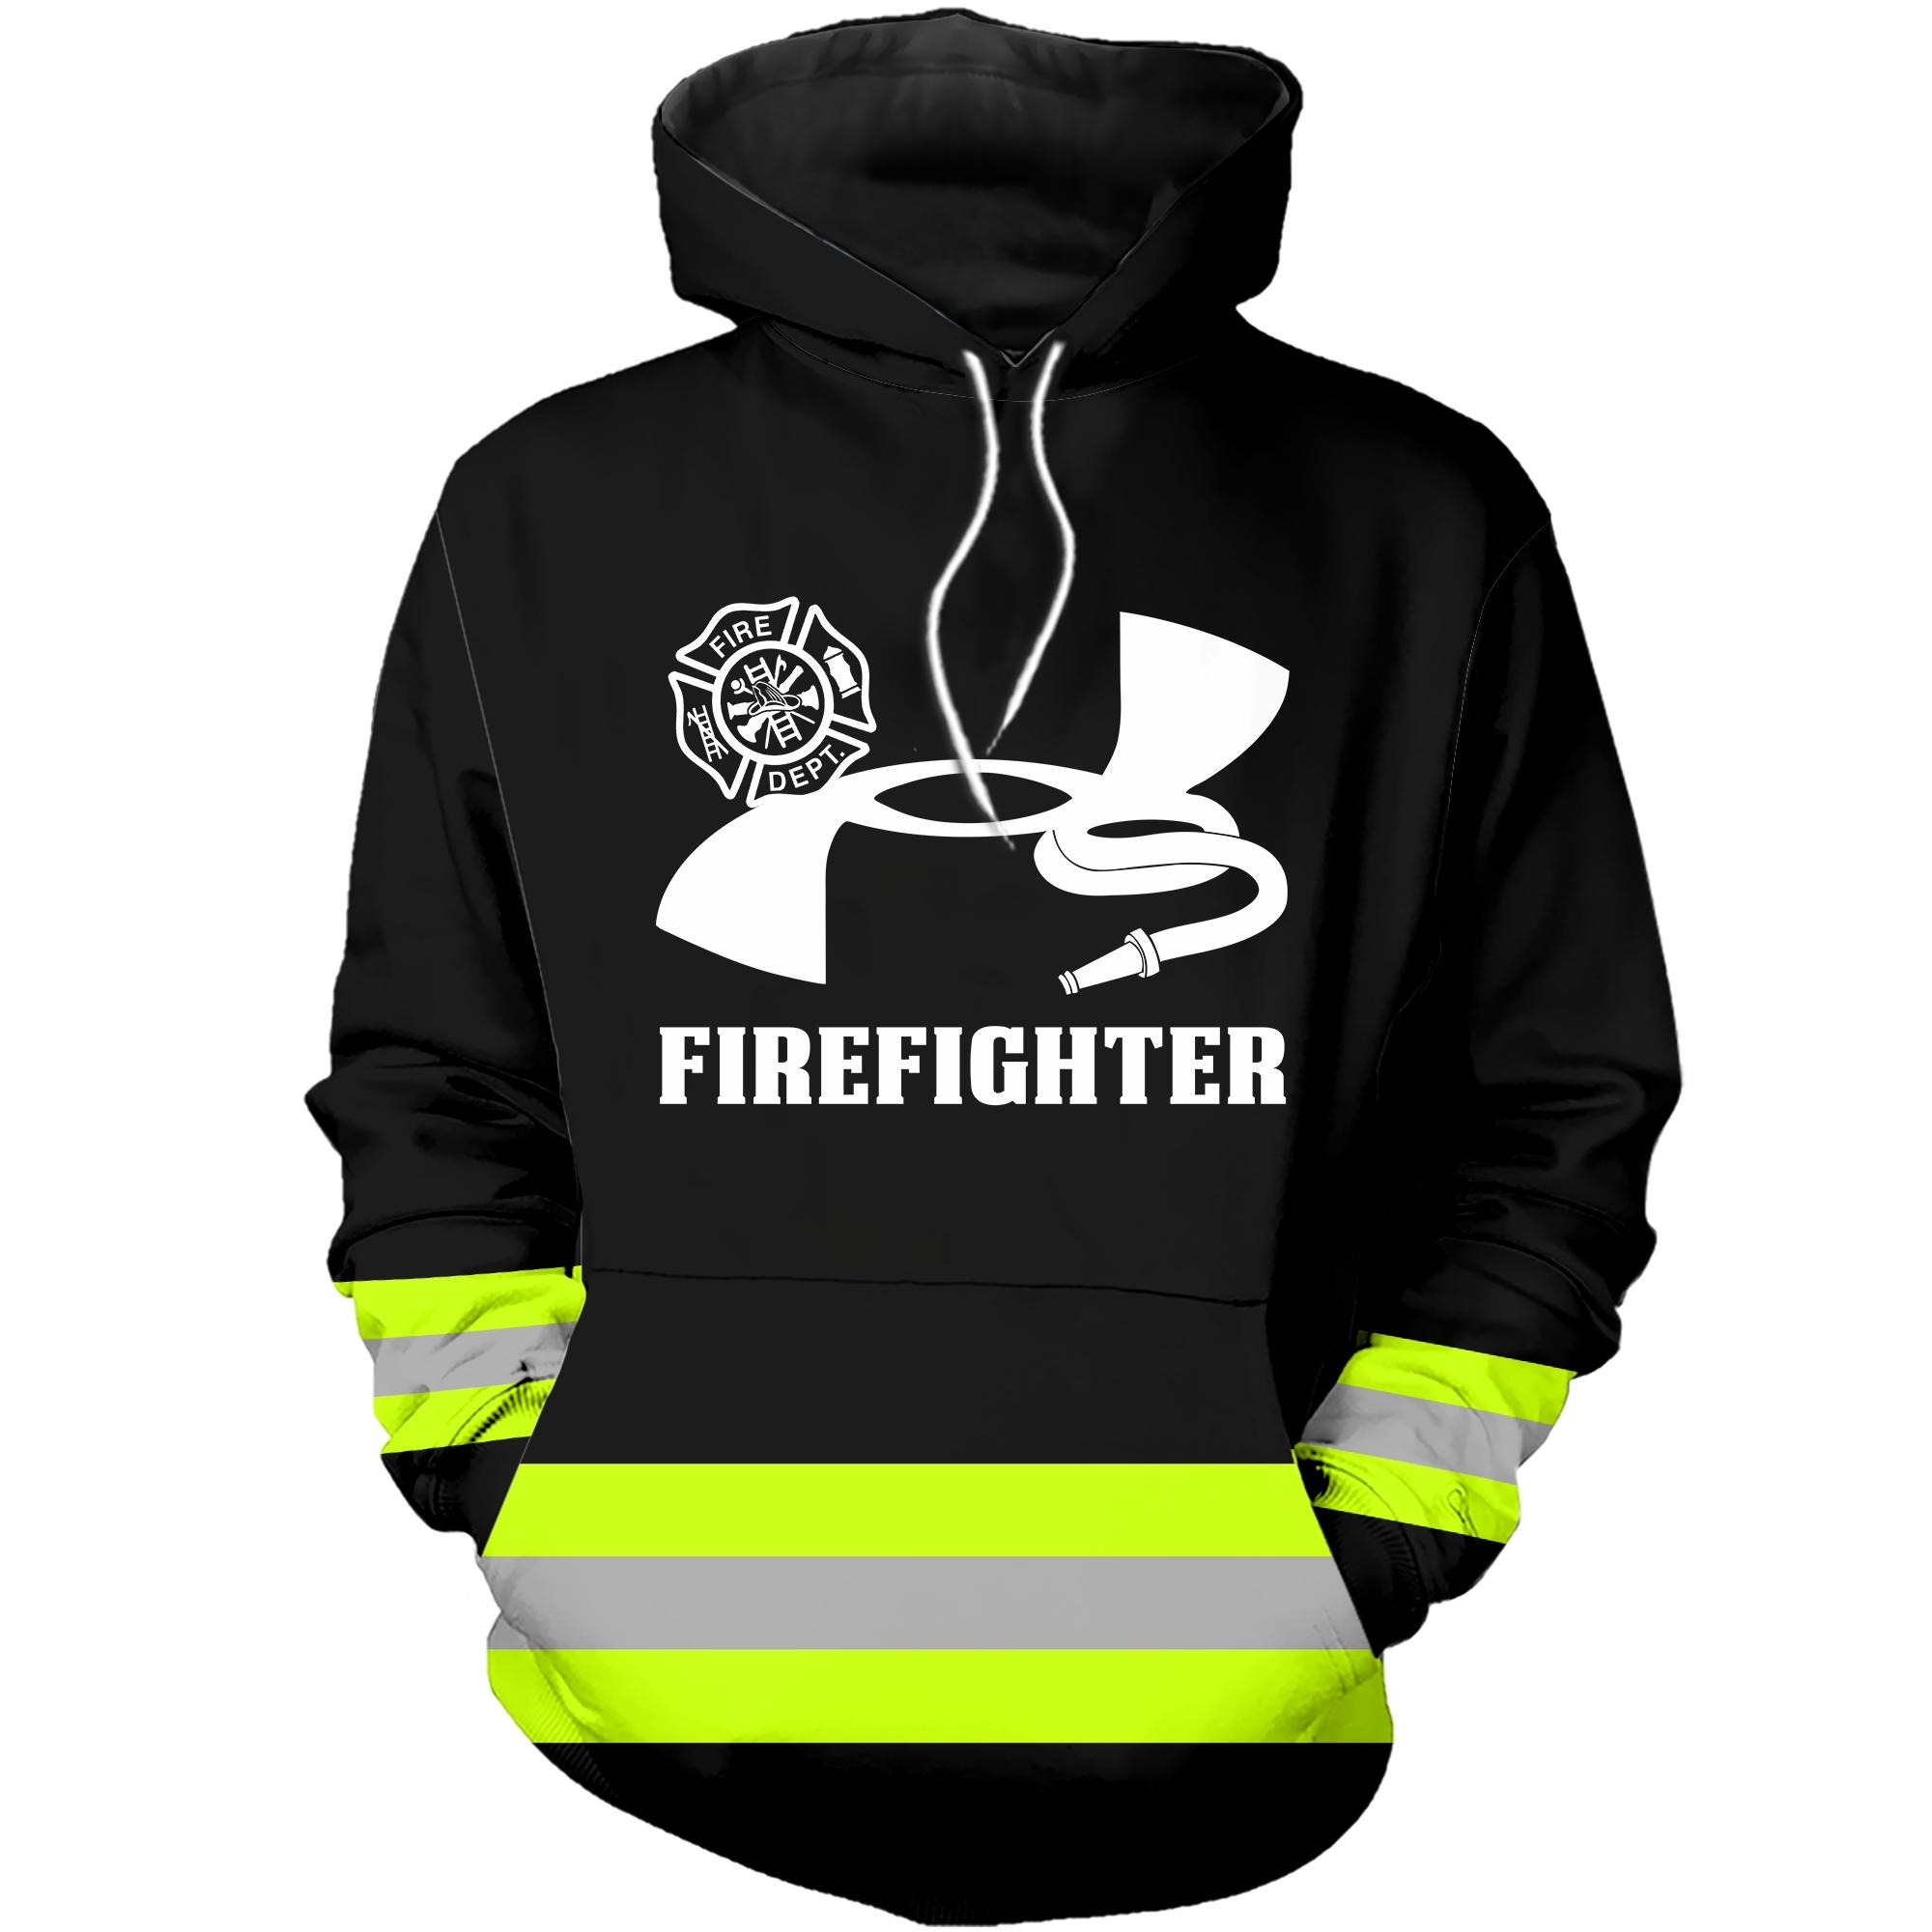 Under Armour firefighter hoodie